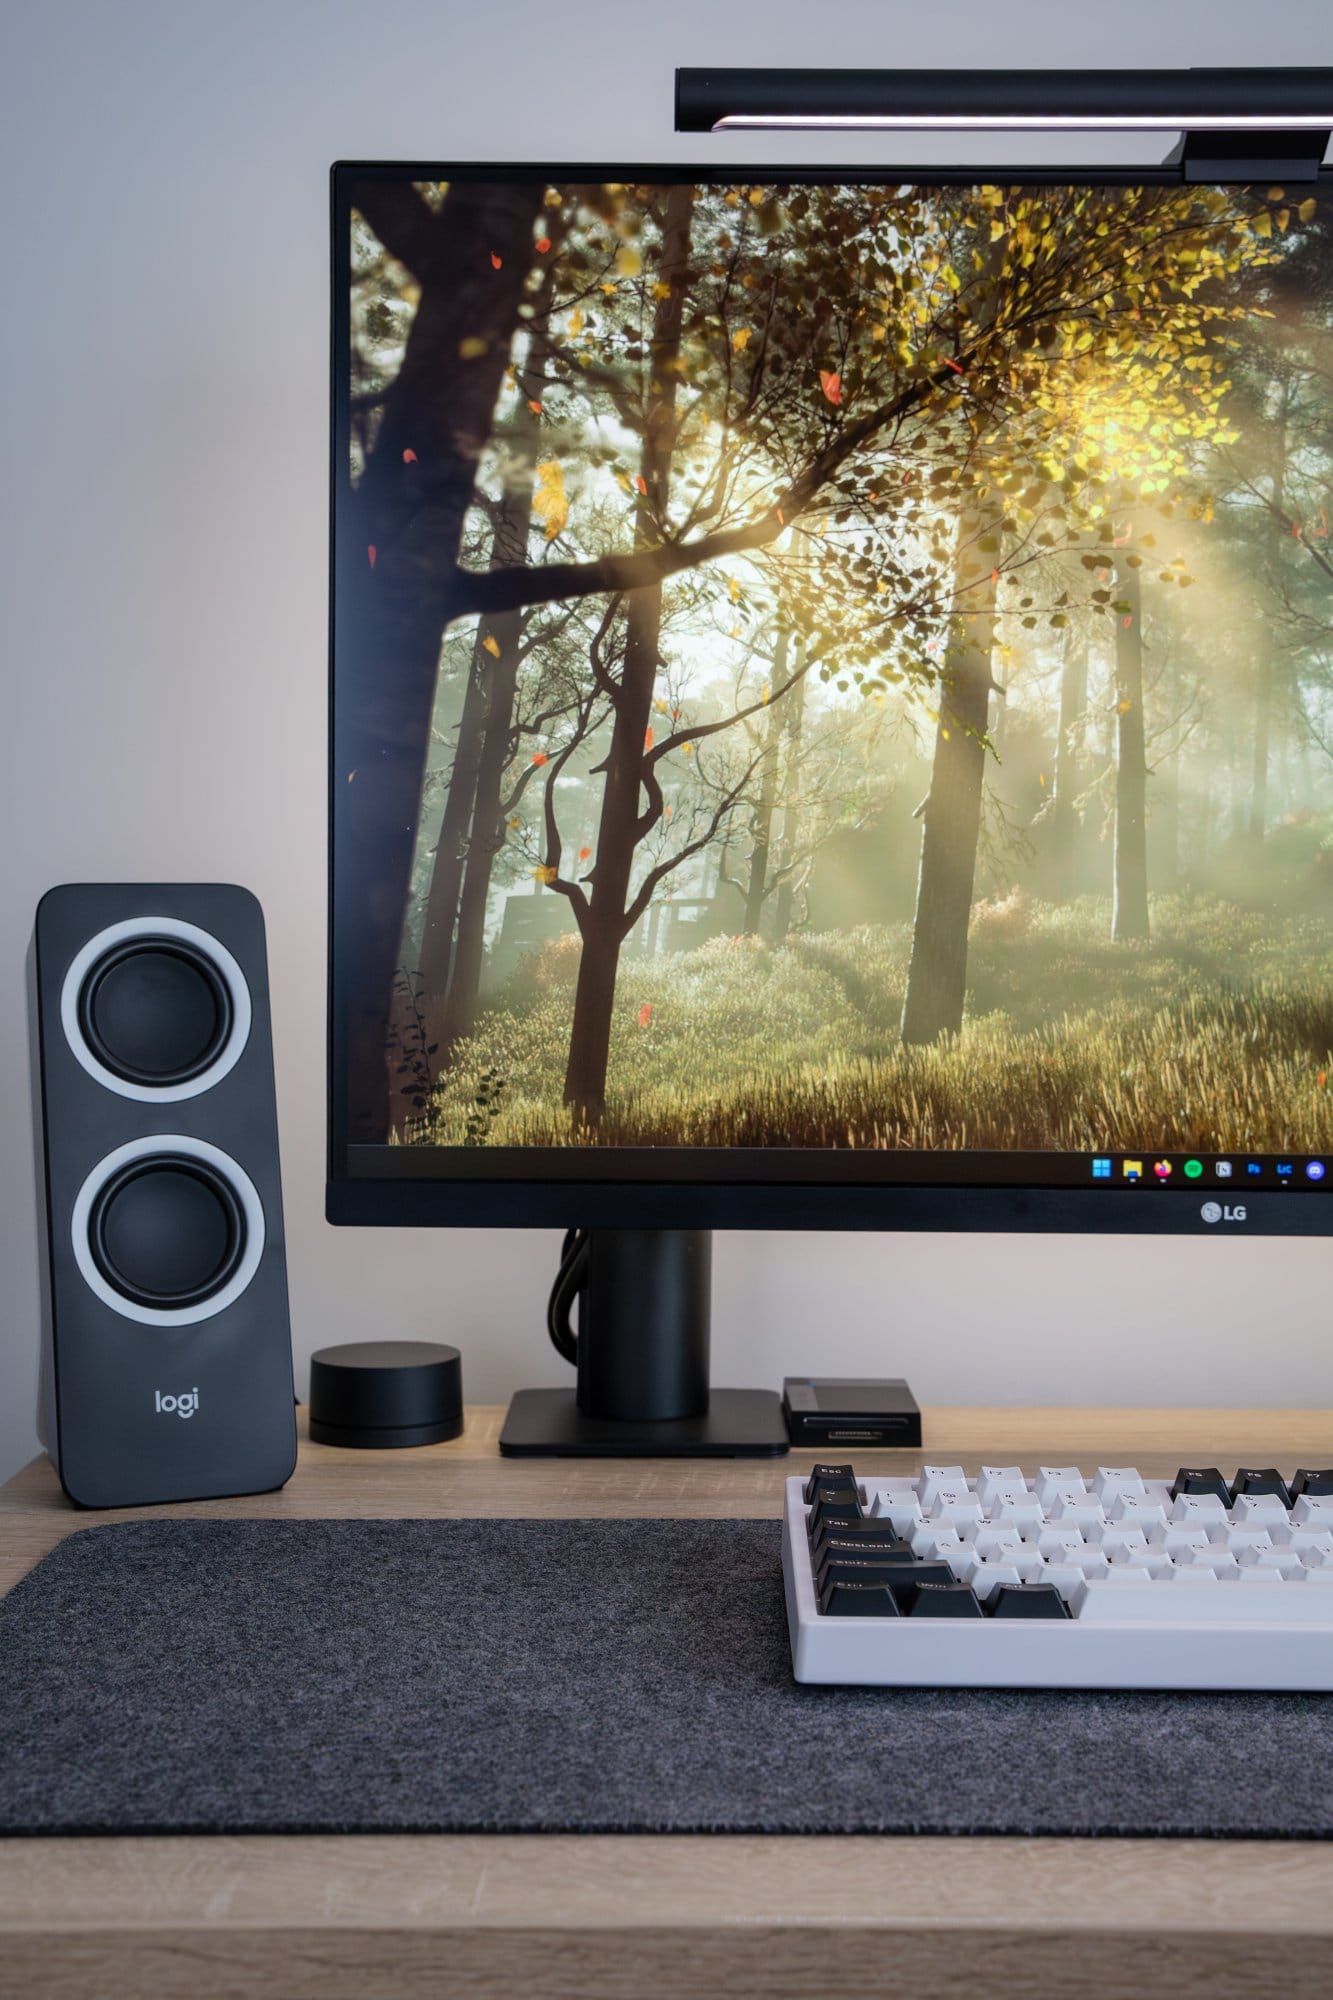 A close-up of the minimal workspace featuring an LG monitor with a forest background, a black stereo speaker, a minimalist soundbar, and a mechanical keyboard on a felt mat